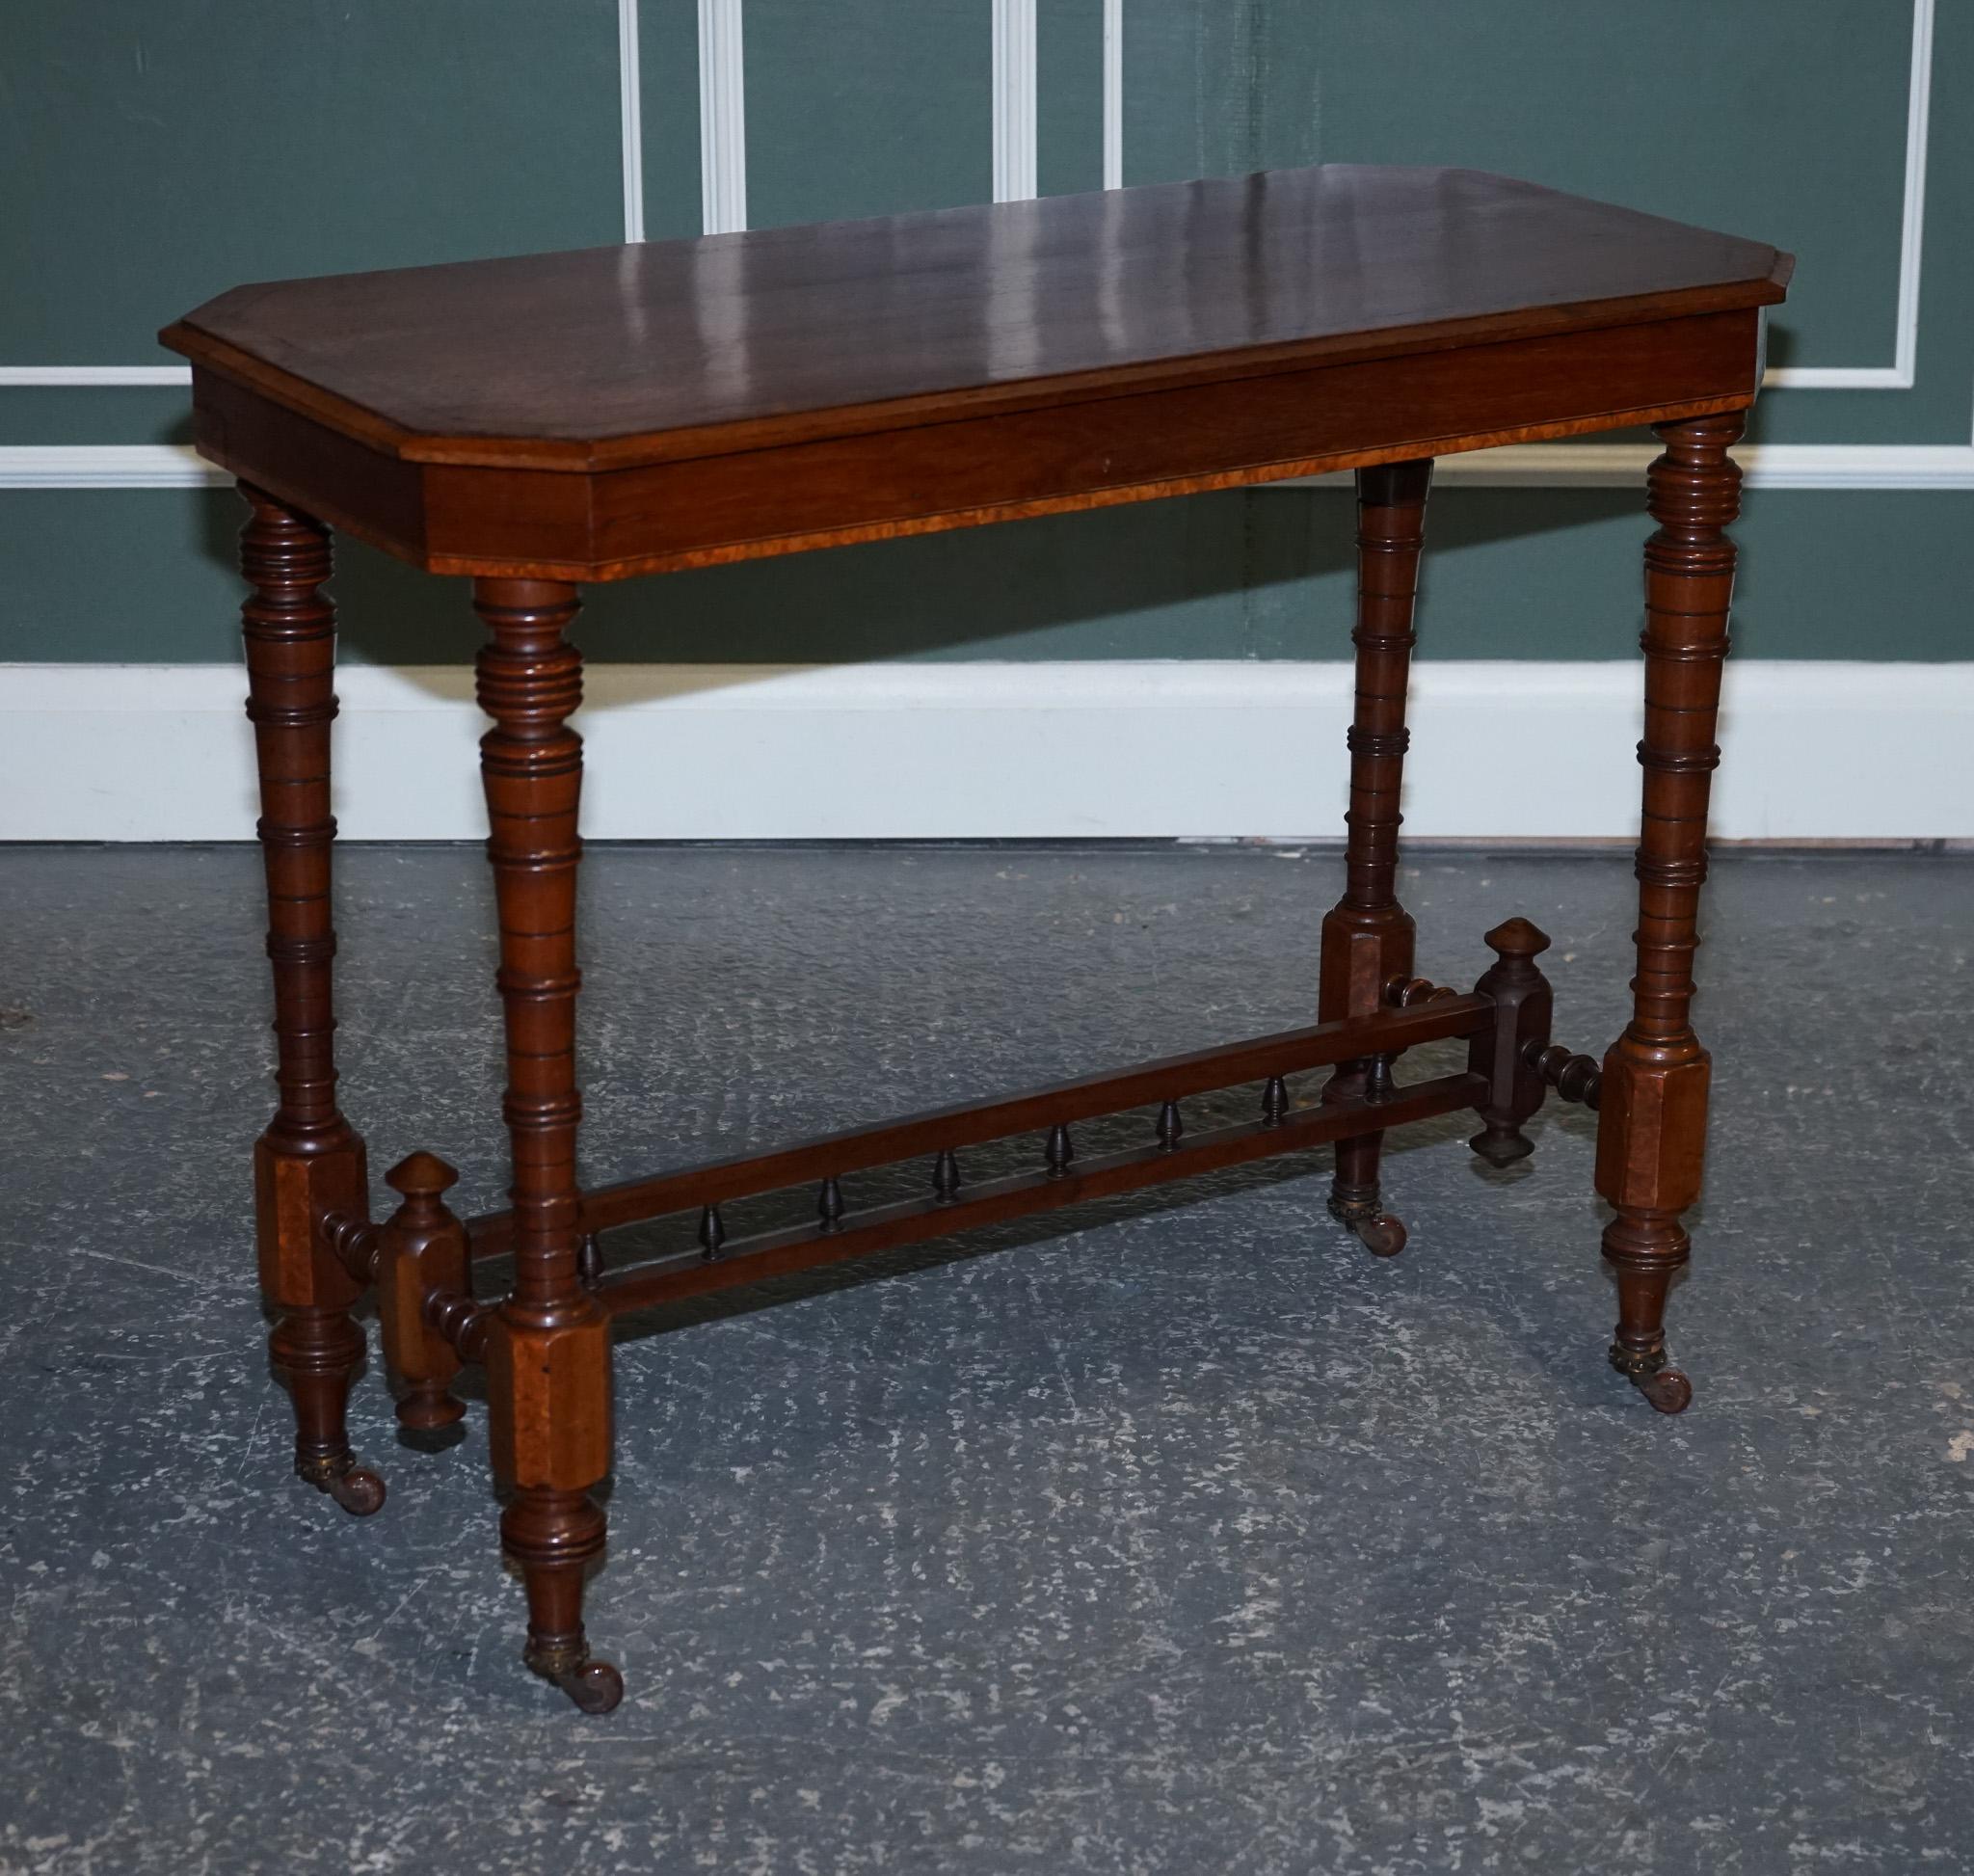 We are delighted to offer for sale this Restored Walnut Console Table with Burr Walnut Wood.

A walnut console table with inlaid burr walnut wood and a whatnot design is a beautiful piece furniture that combines with elegance and functionality.